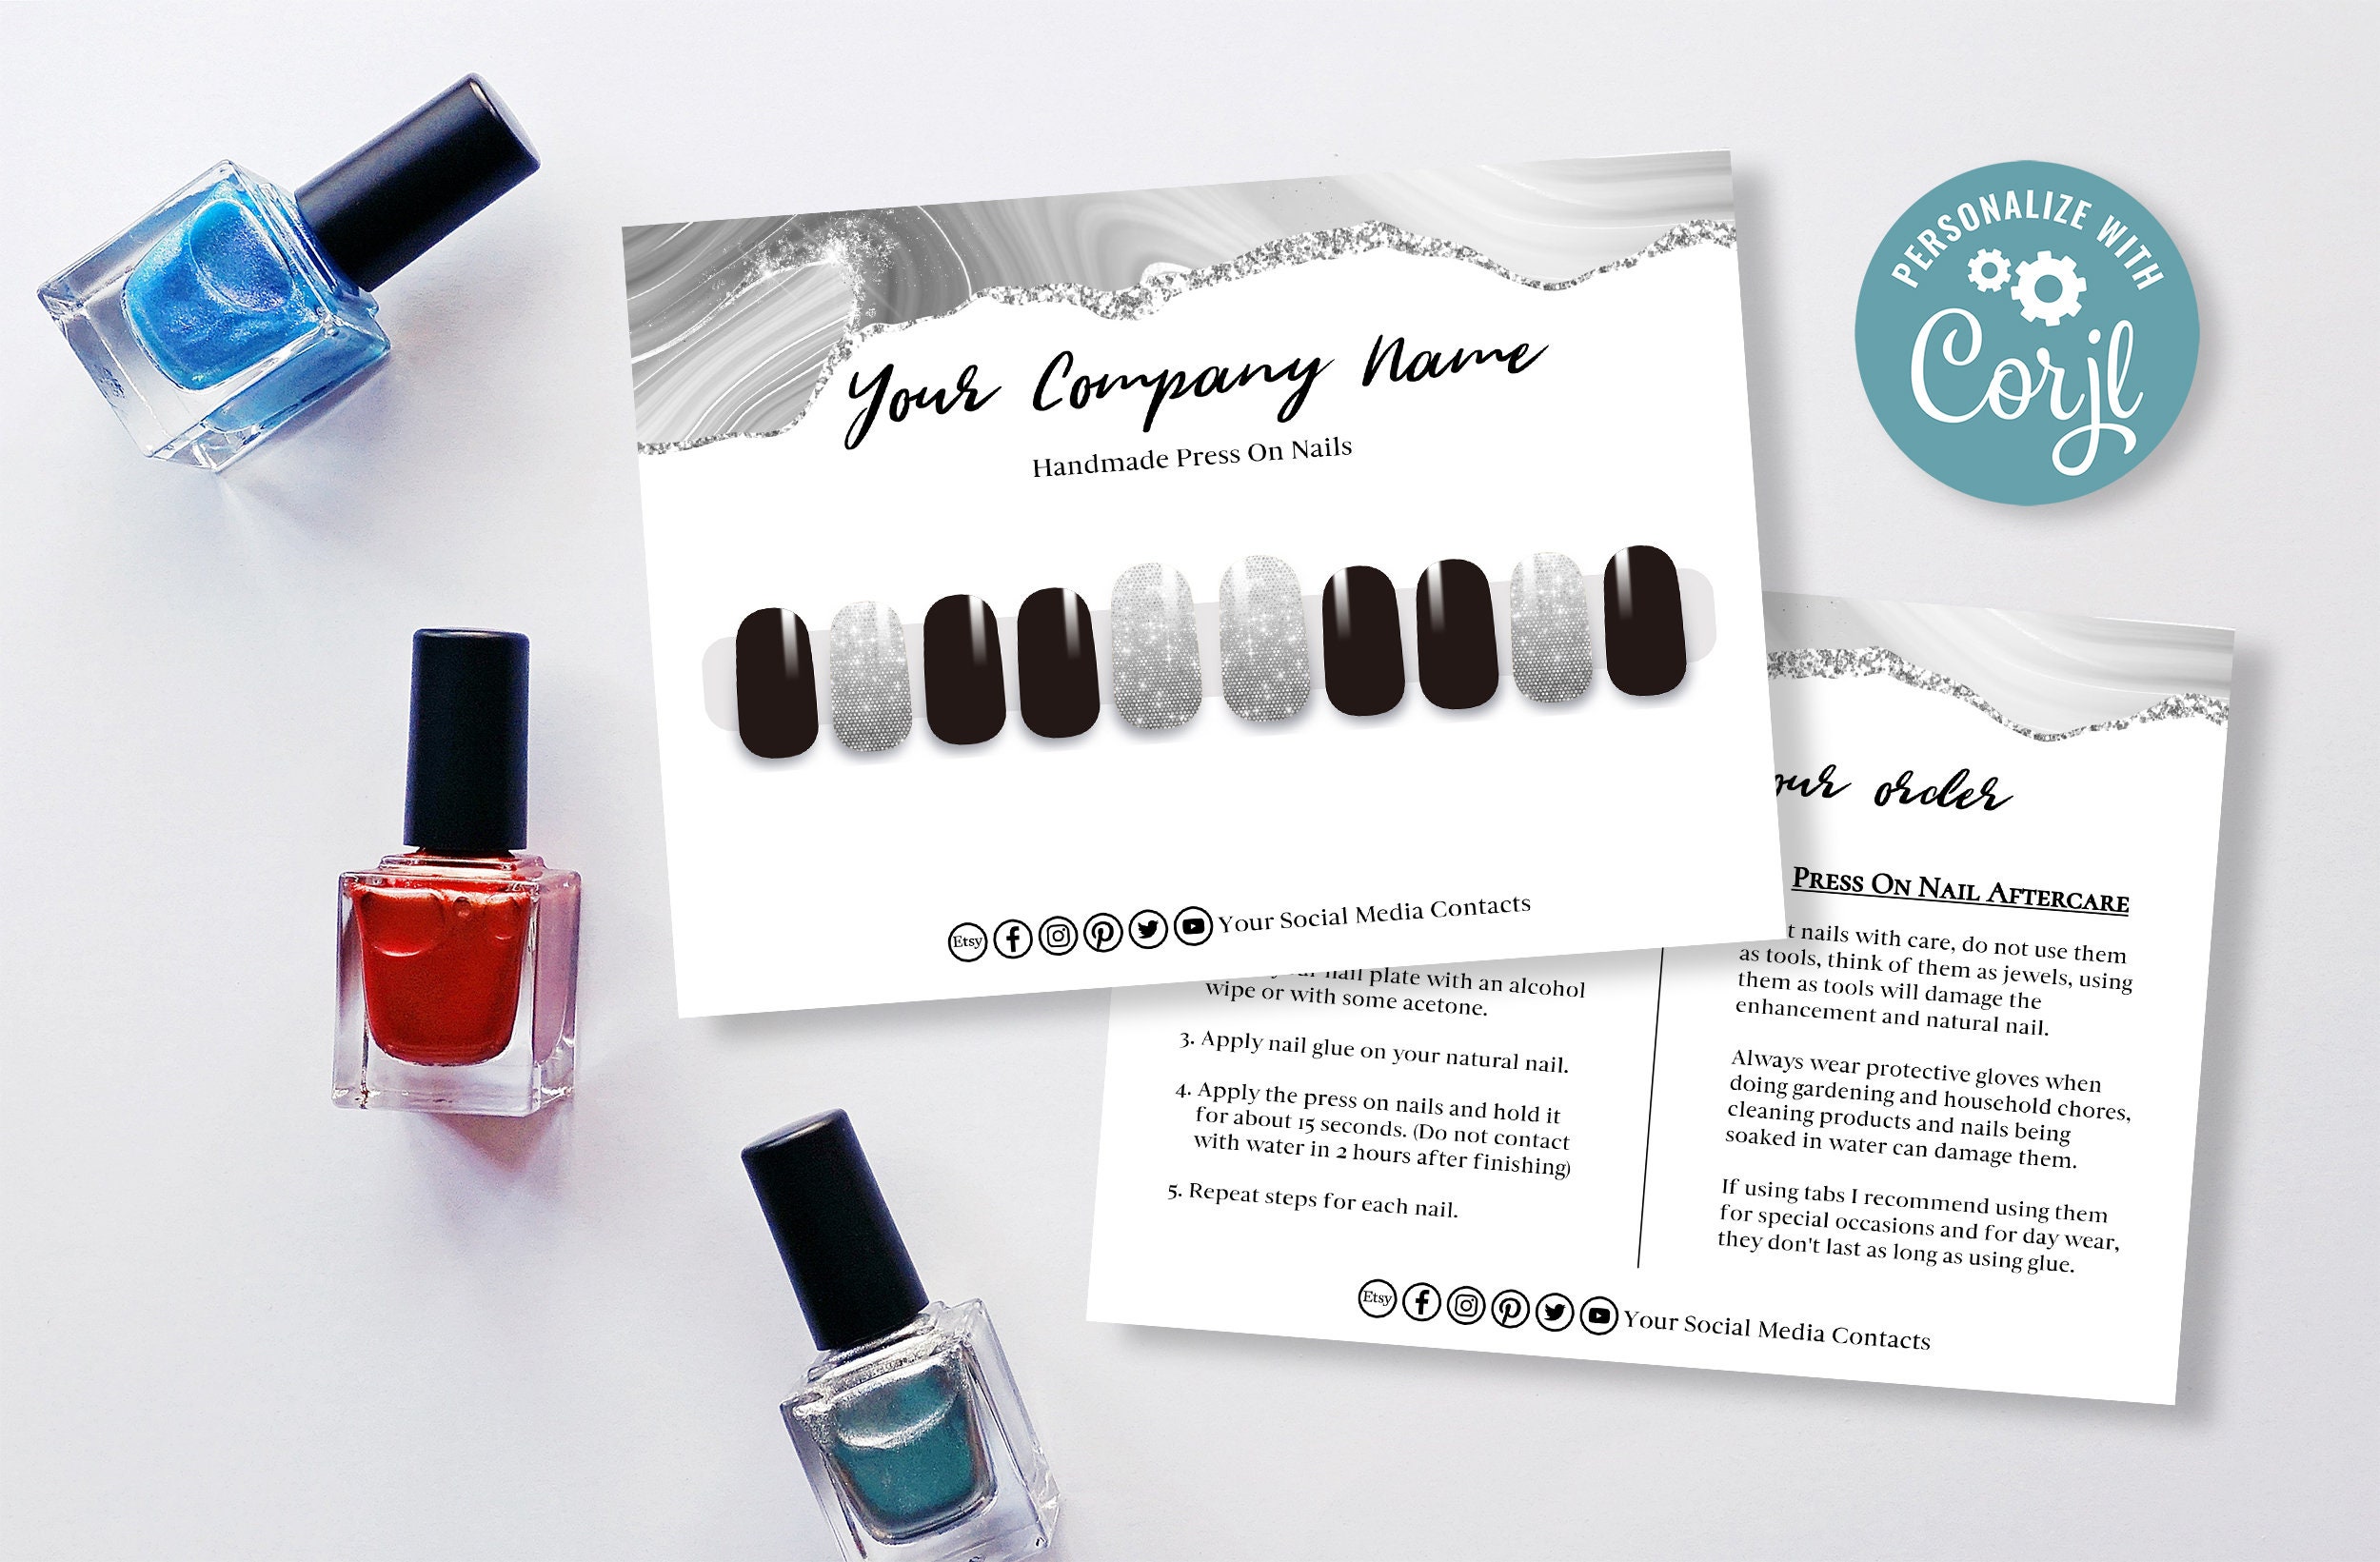 6. Professional Nail Business Card Designs - wide 9